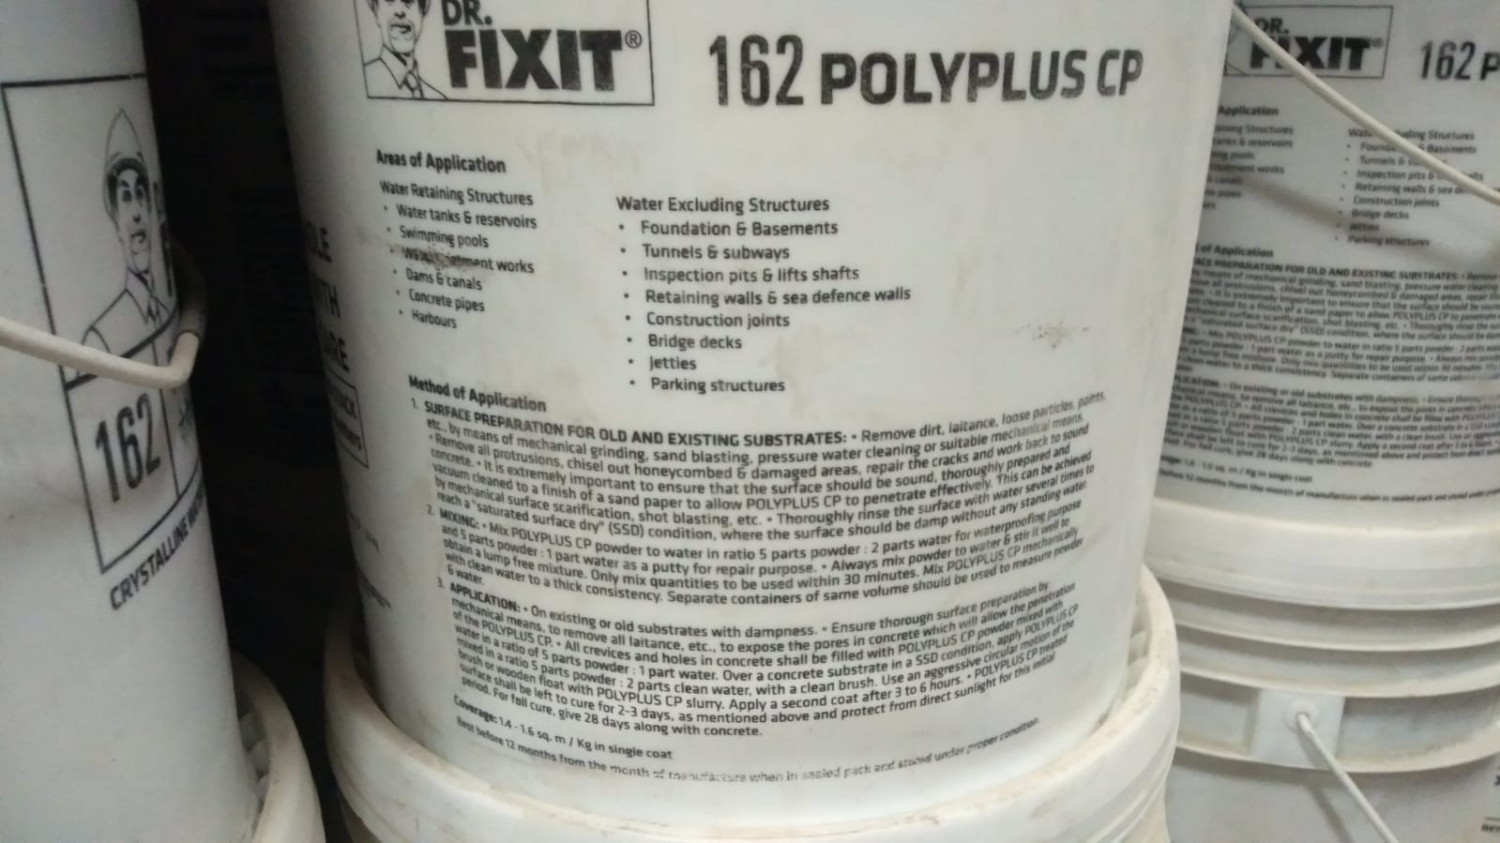 Dr. Fixit Polyplus CP